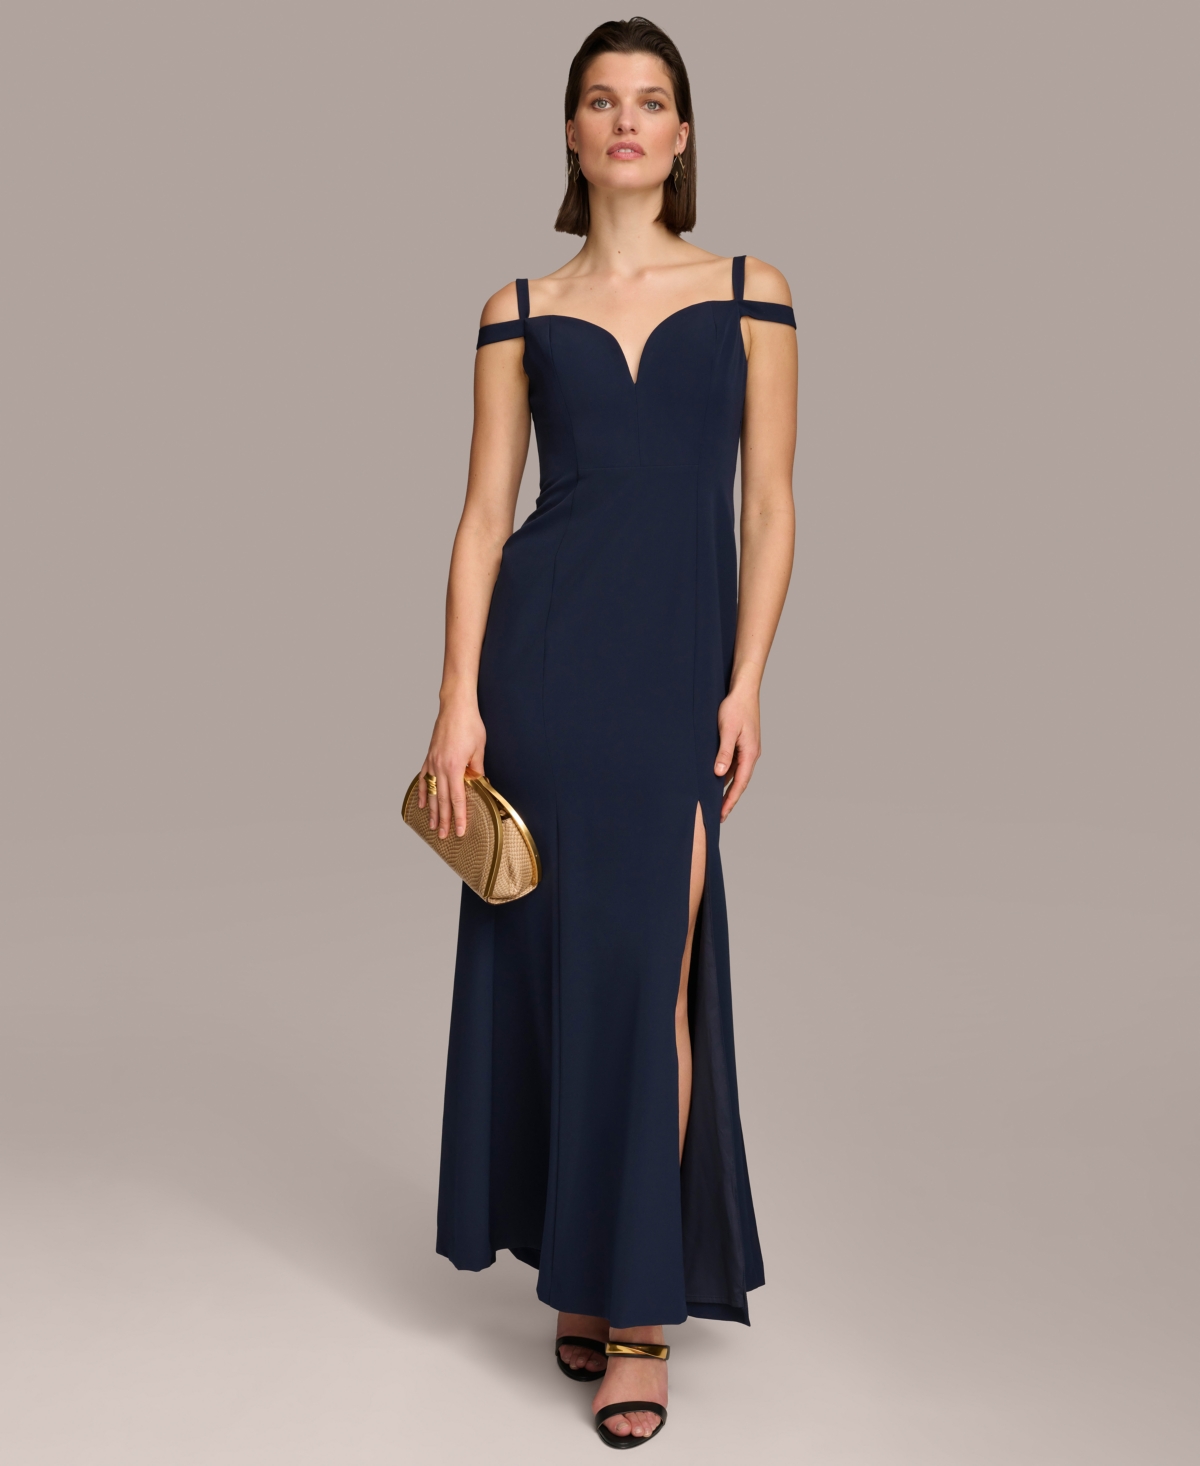 Women's Sweetheart-Neck Cold-Shoulder Gown - Navy